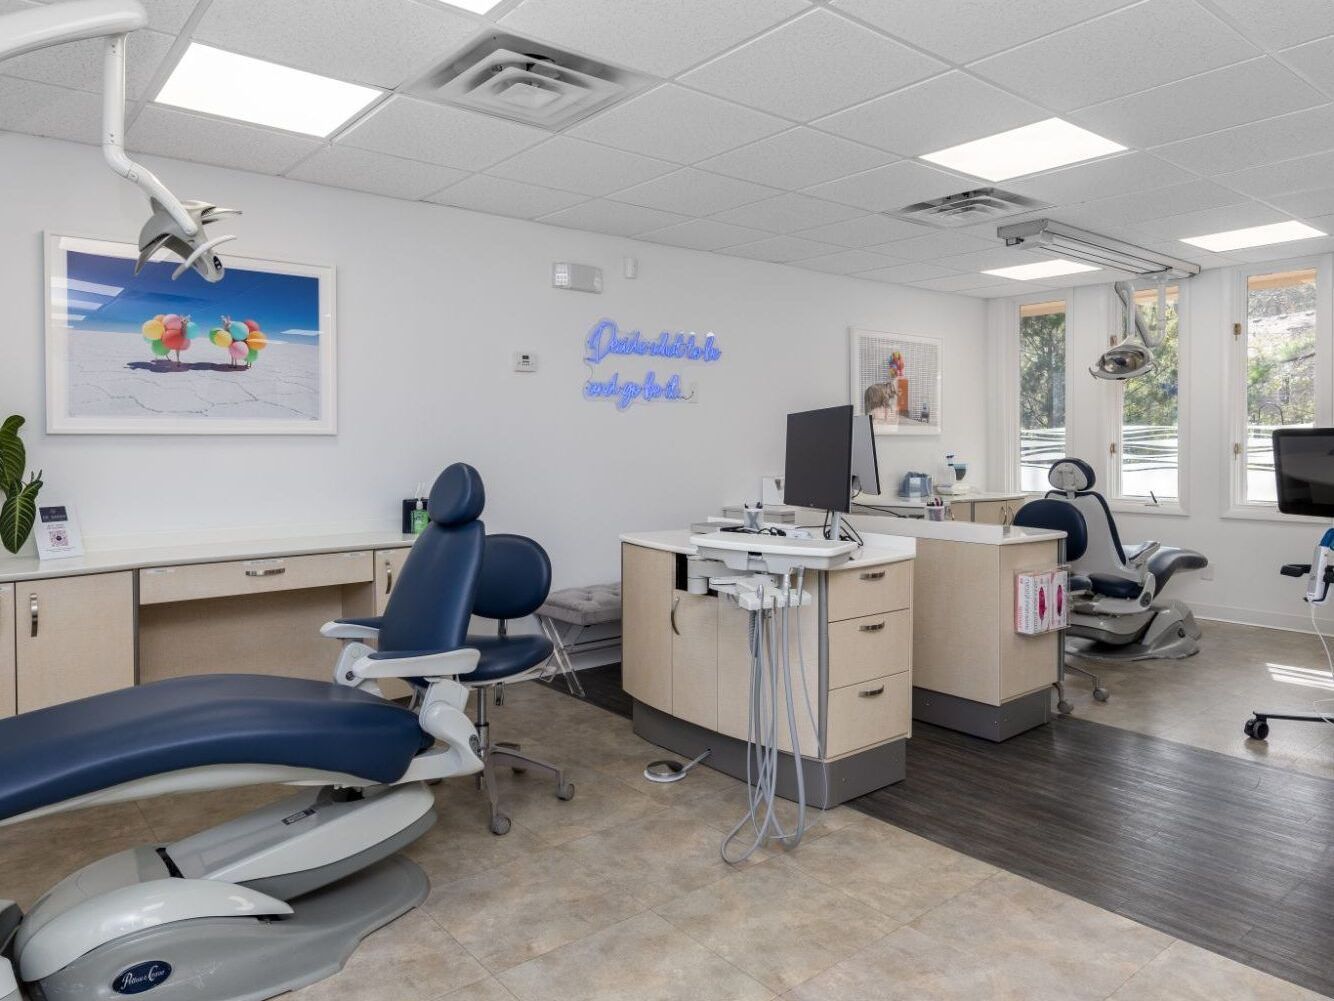 a dental office with a neon sign that says johnellis alpha